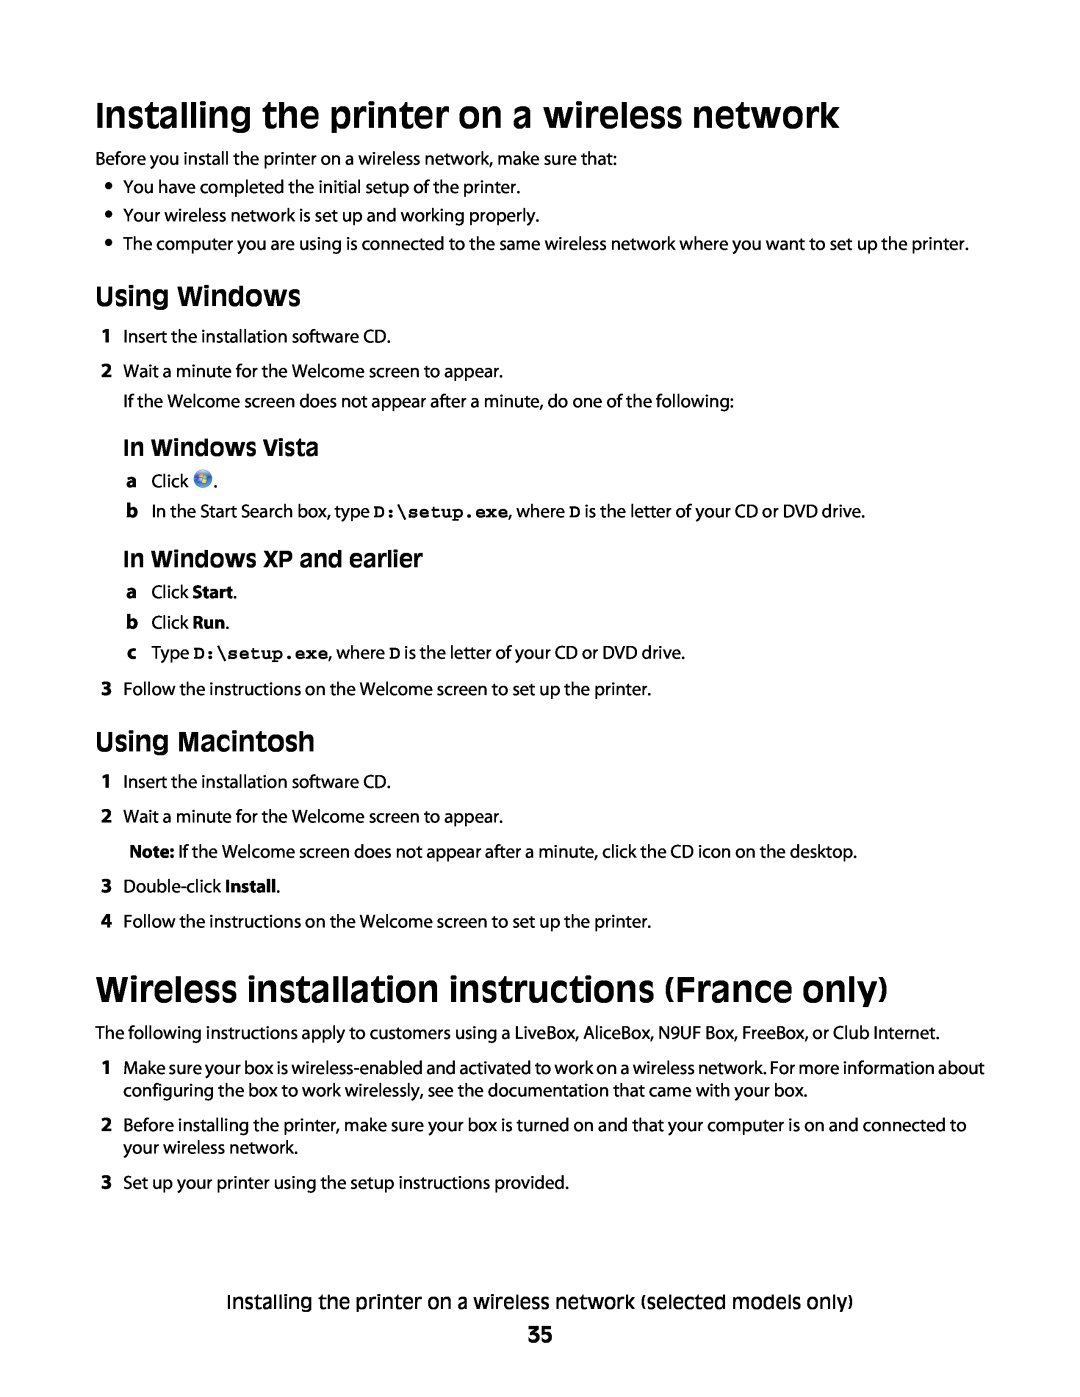 Lexmark 3600 Installing the printer on a wireless network, Wireless installation instructions France only, Using Windows 